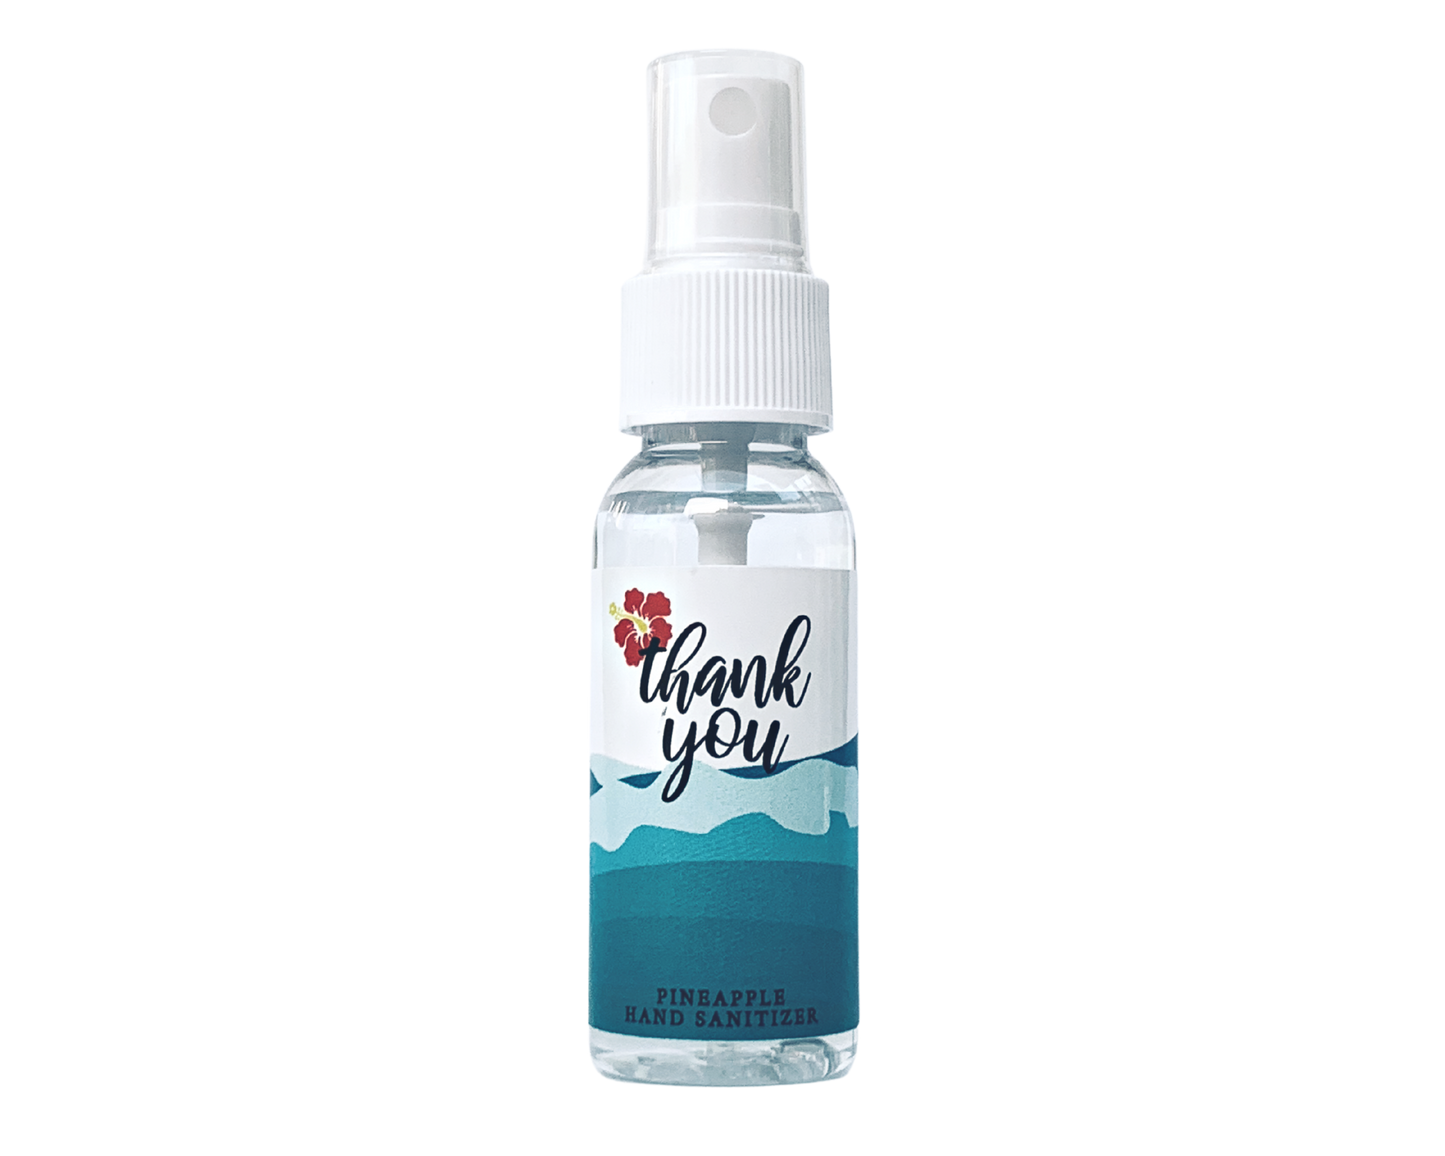 Hand Sanitizer Party Favor - Ocean Hibiscus - Thank You - with Aloe & Essential Oils by Sunshine & Sanitizer